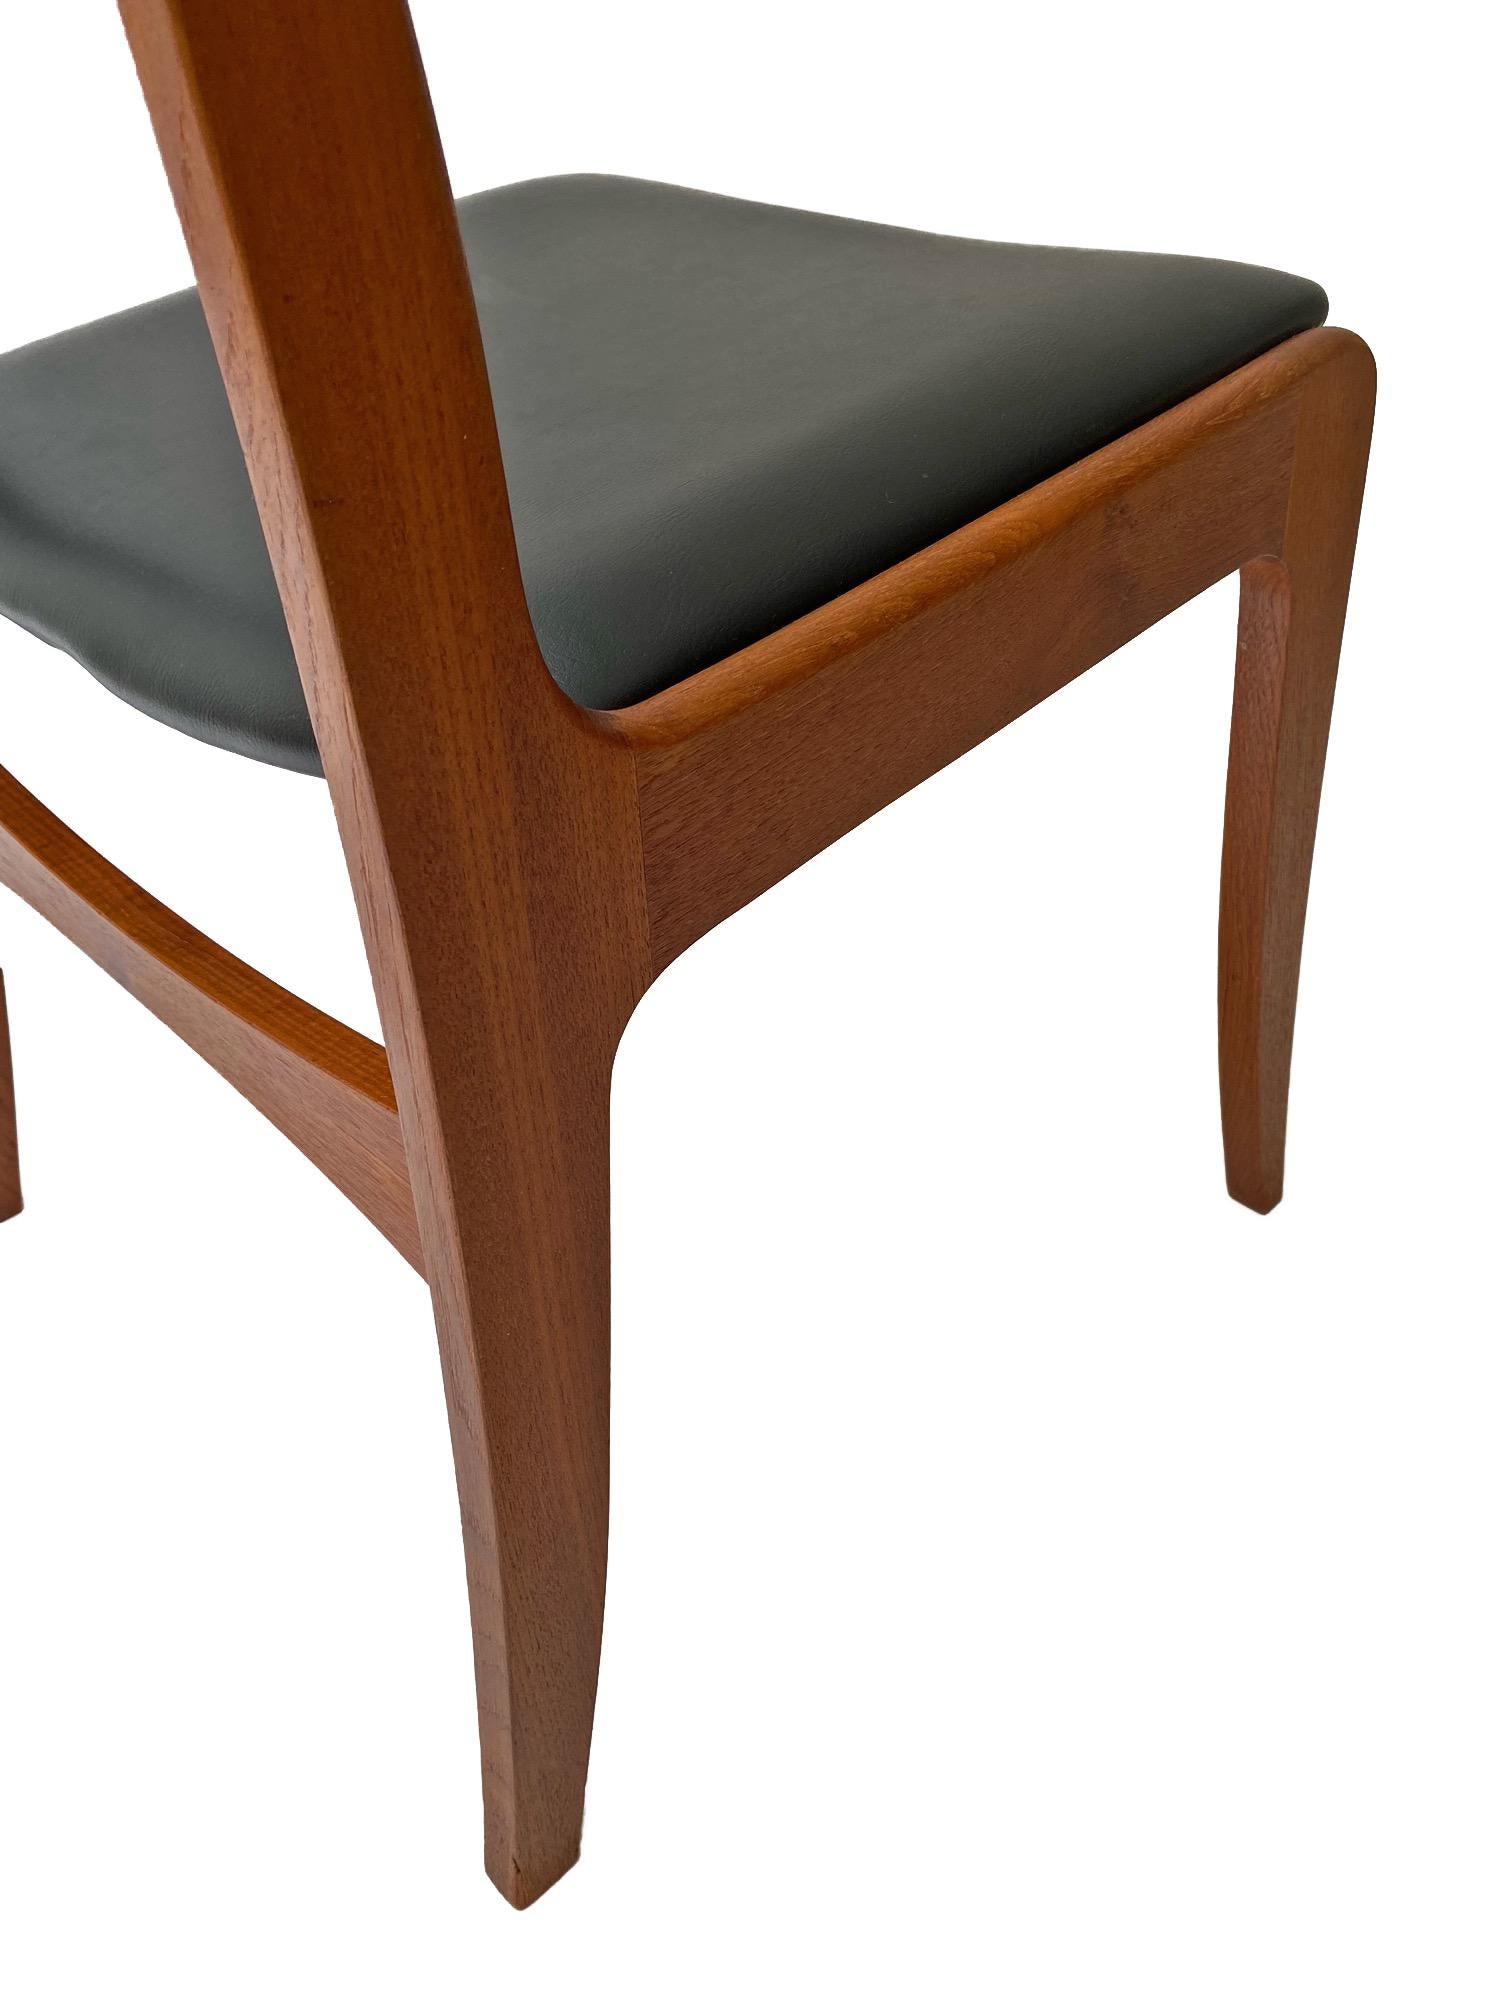 Danish Set of 4 Teak and Black Vinyl Dining Chairs, Mid Century 1960s For Sale 2